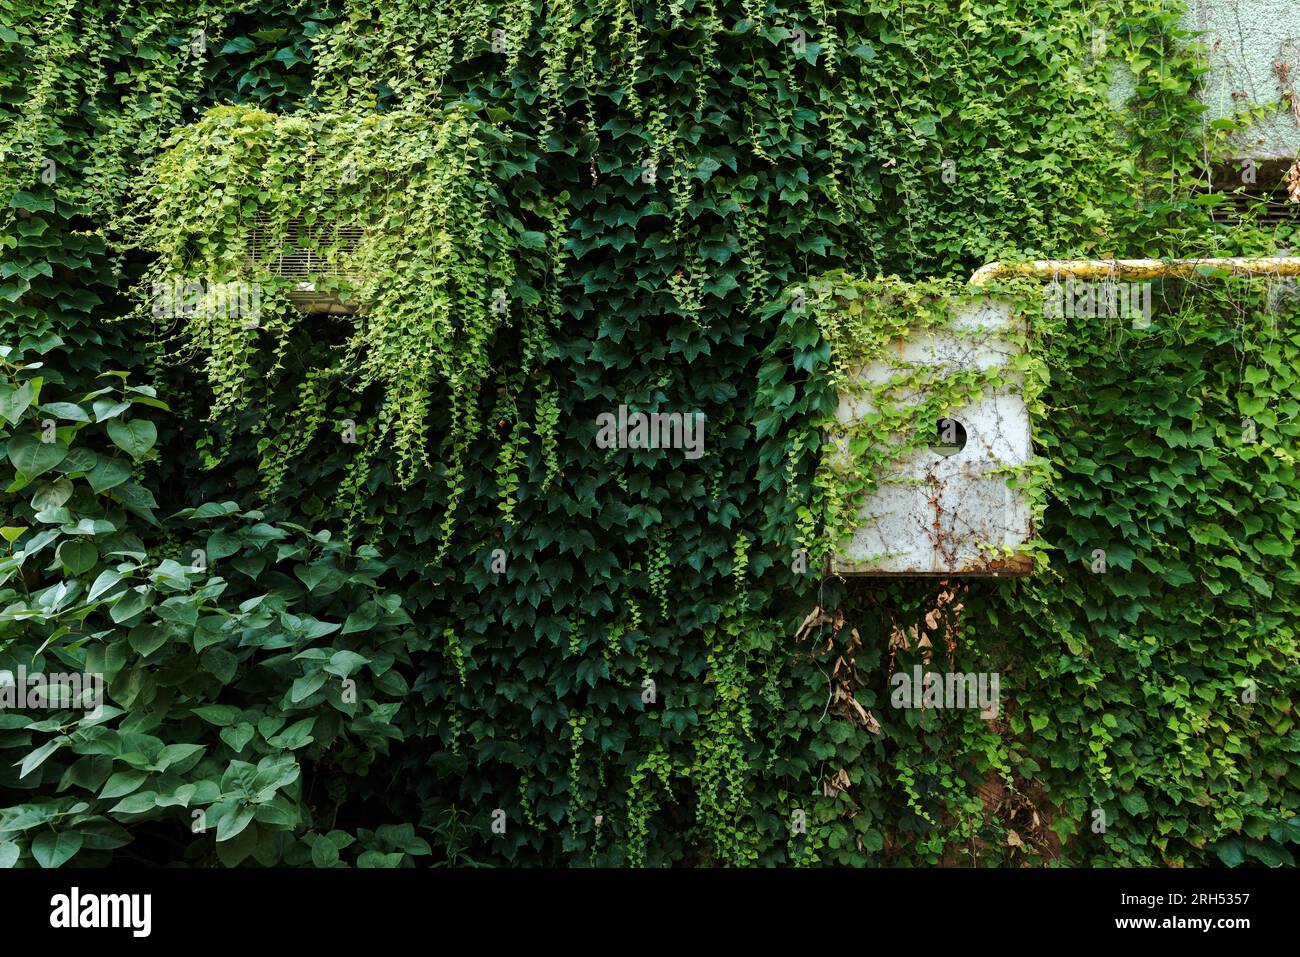 Air conditioner heat pump external unit covered in creeping plant mounted on exterior wall Stock Photo